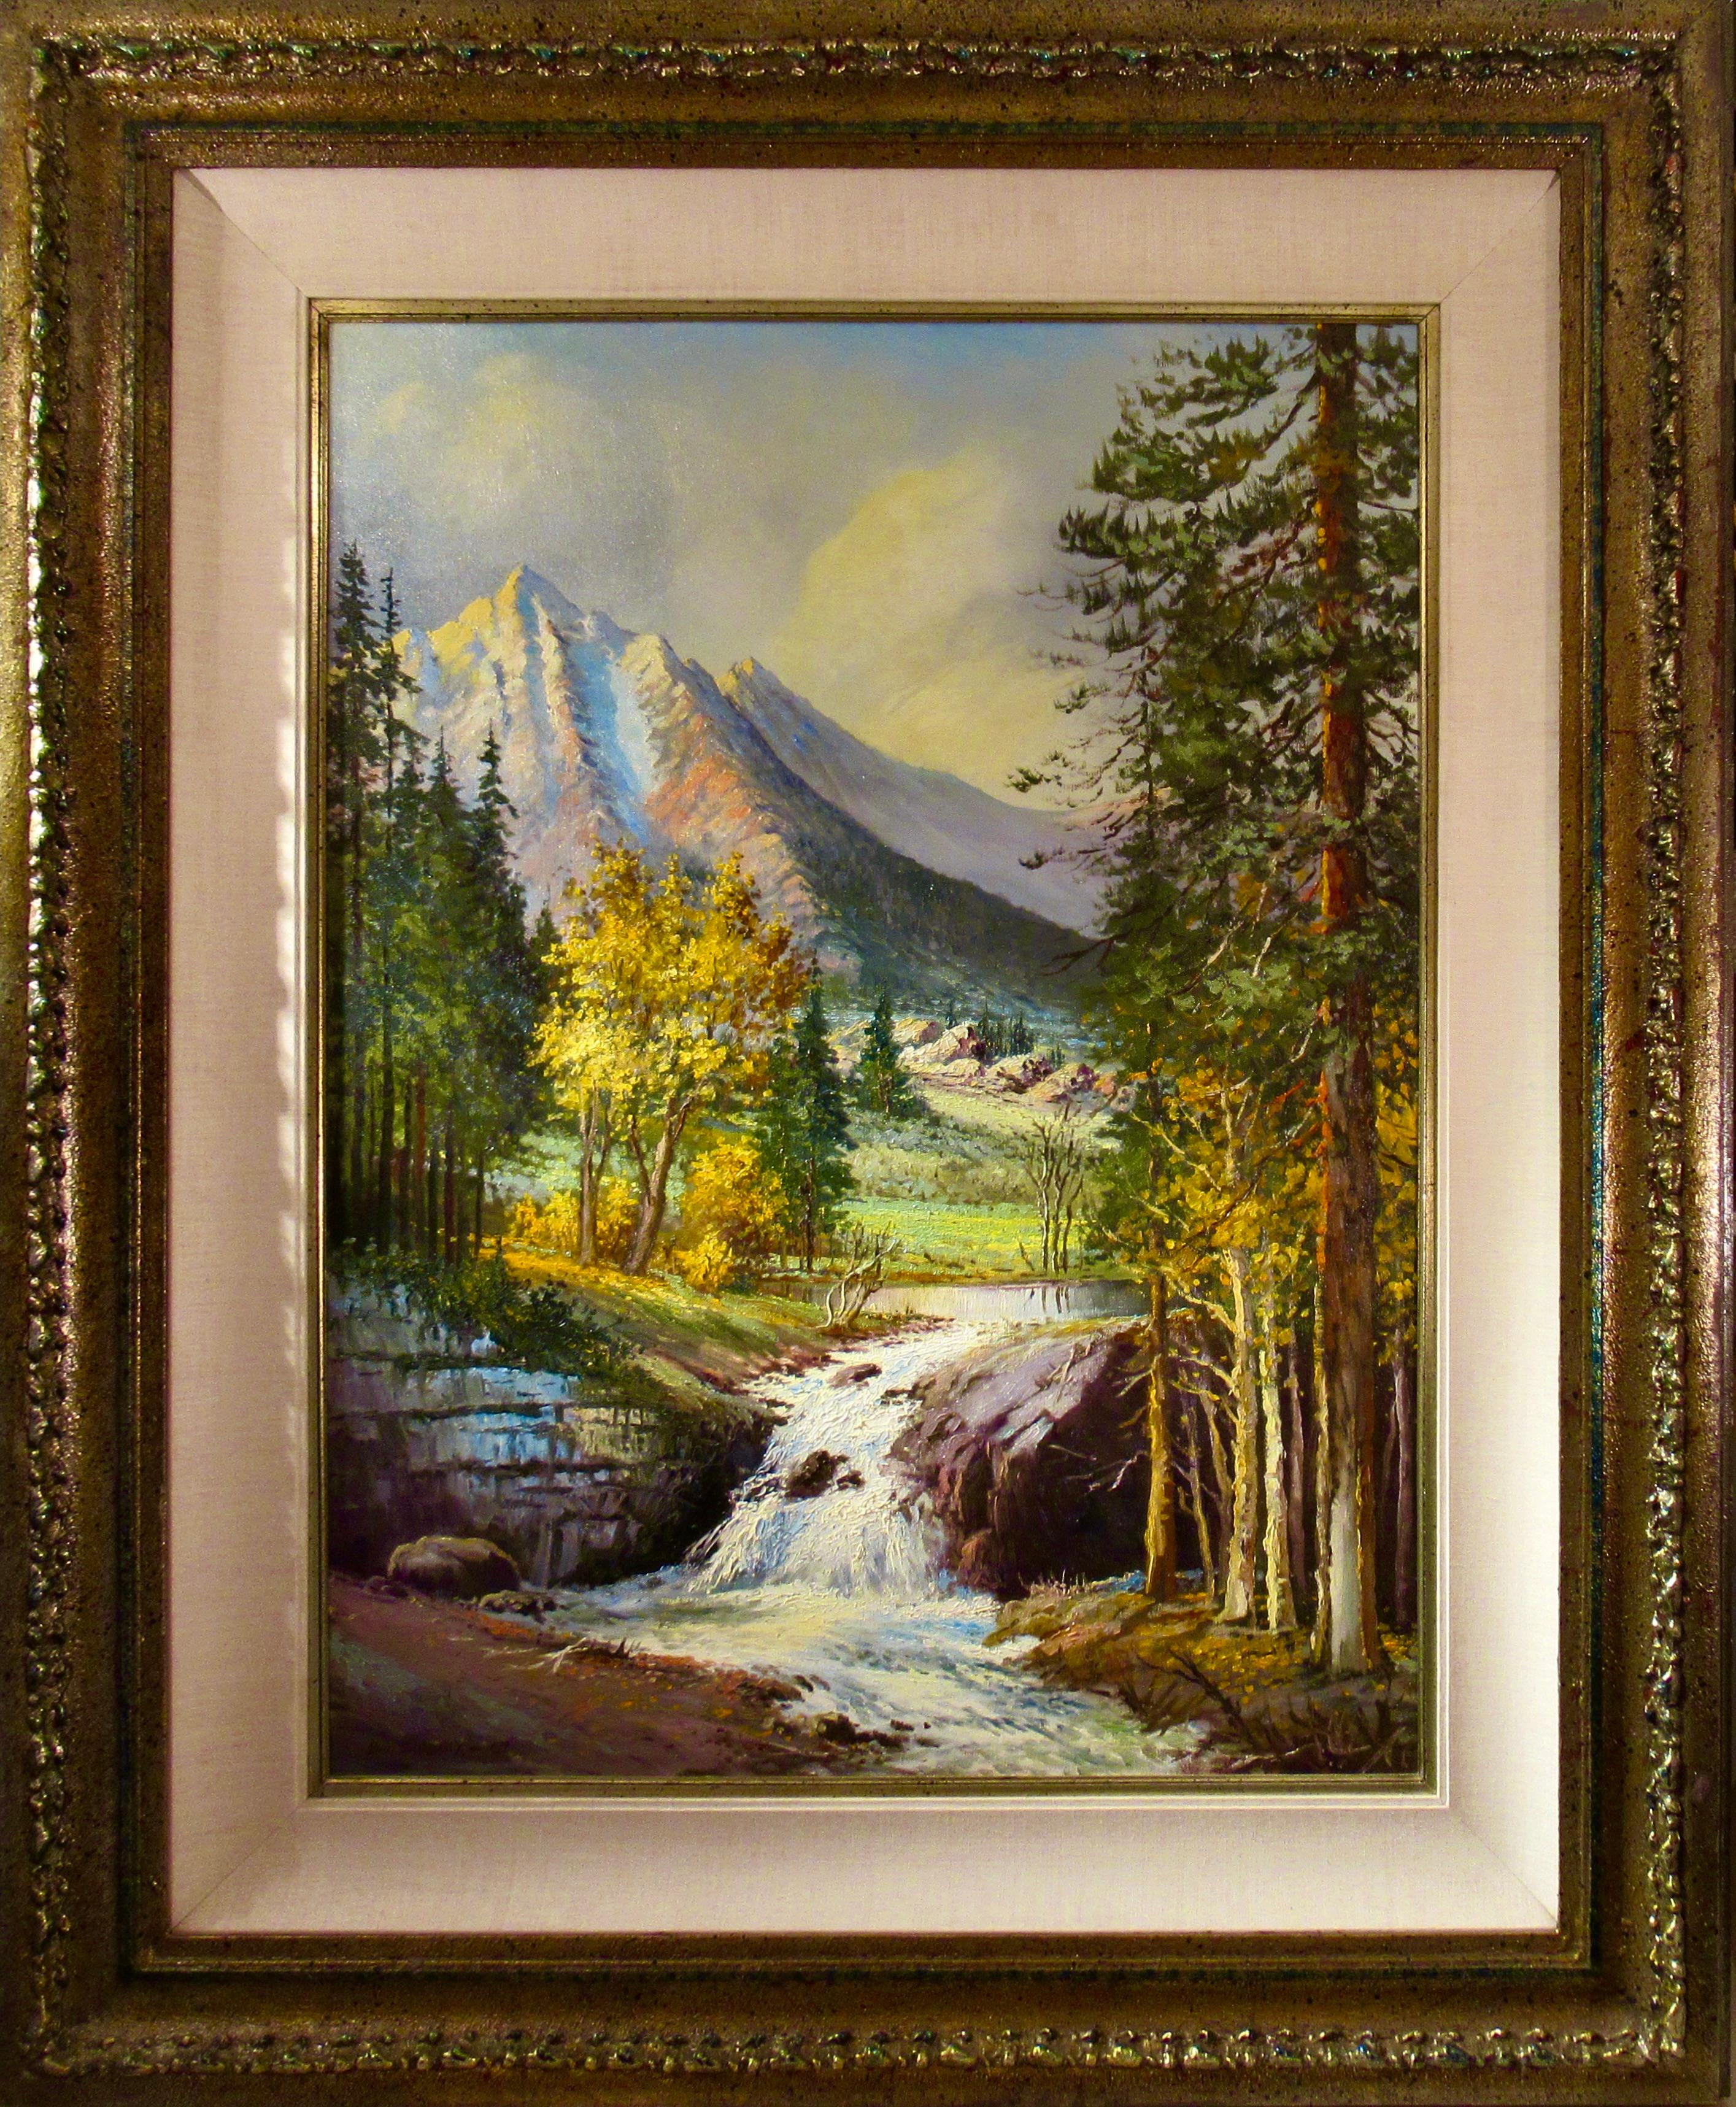 Bill Shaddix Figurative Painting - "California Landscape" Large oil painting on canvas